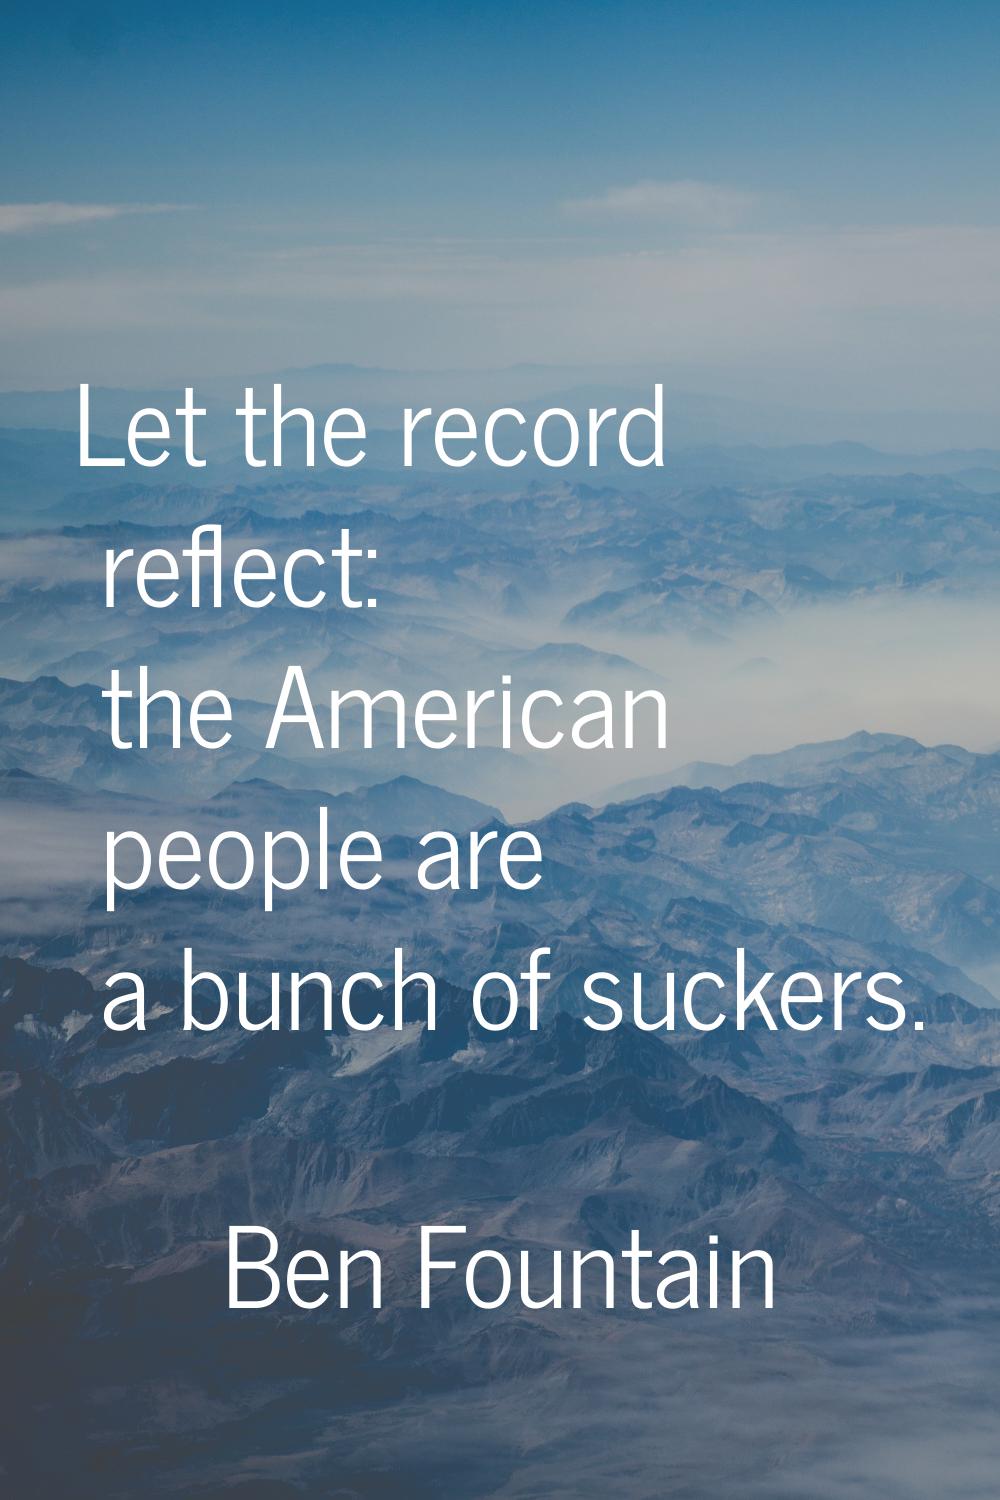 Let the record reflect: the American people are a bunch of suckers.